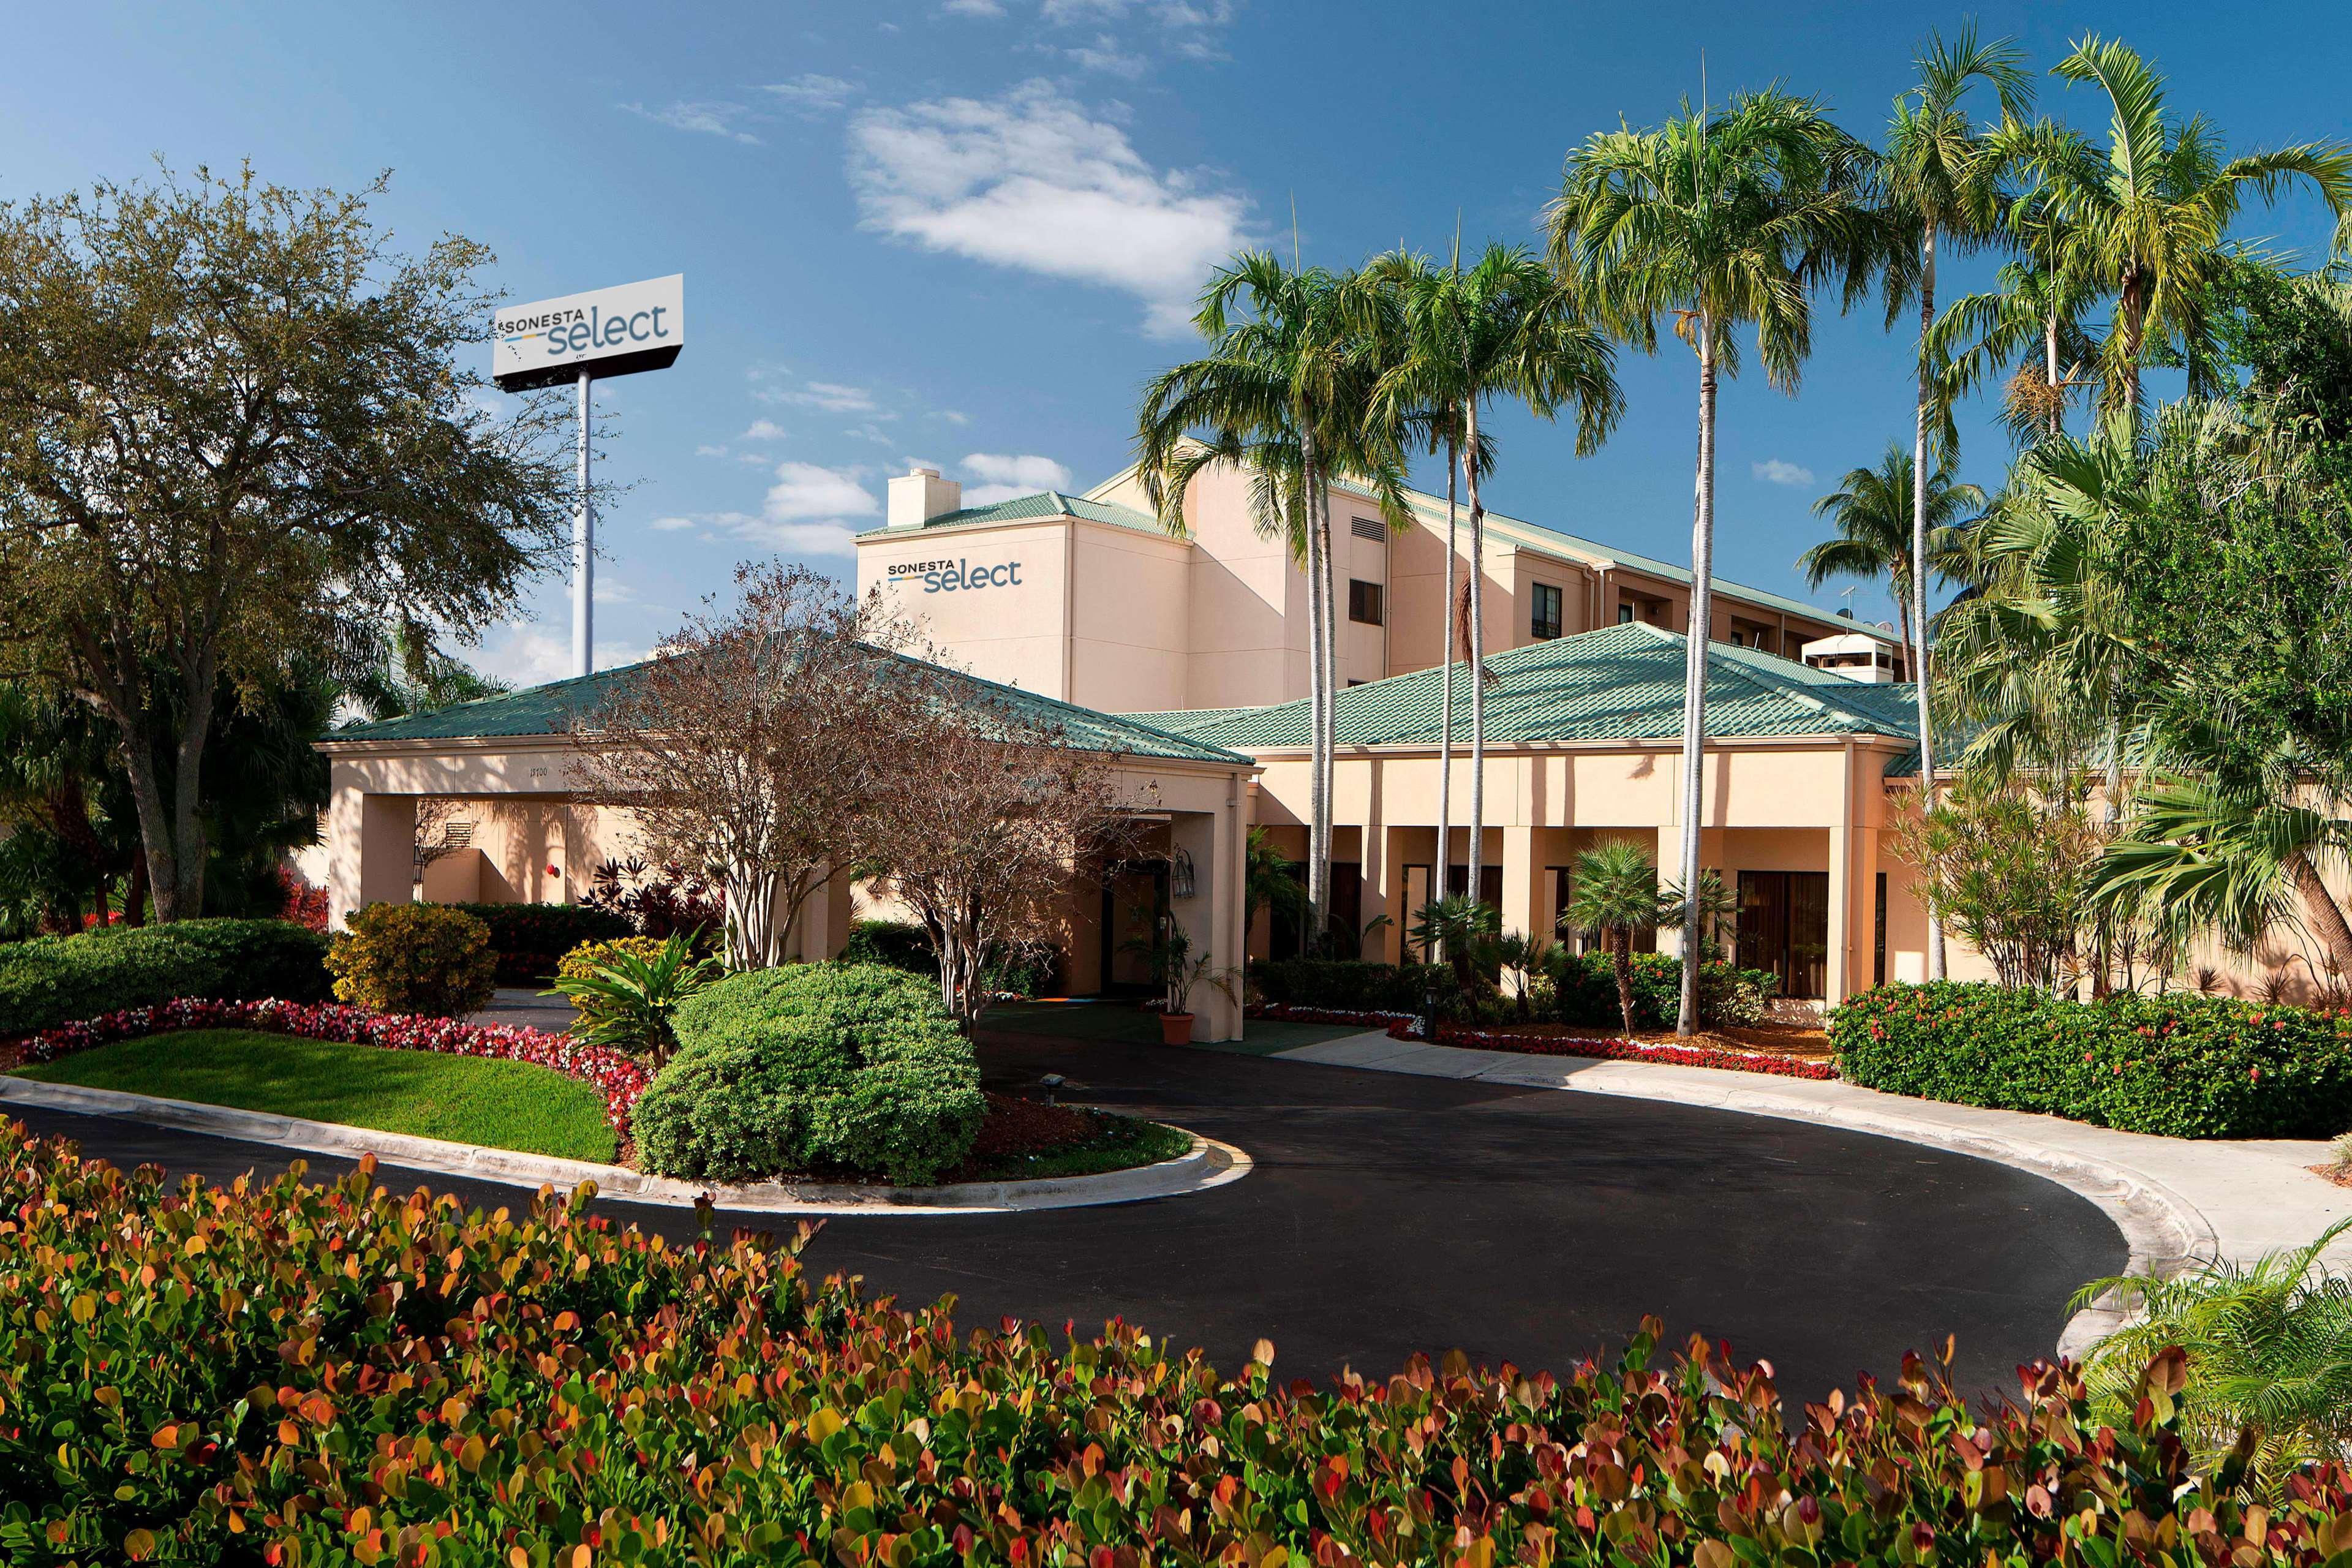 HOTEL SONESTA SELECT MIAMI LAKES, FL 3* (United States) - from